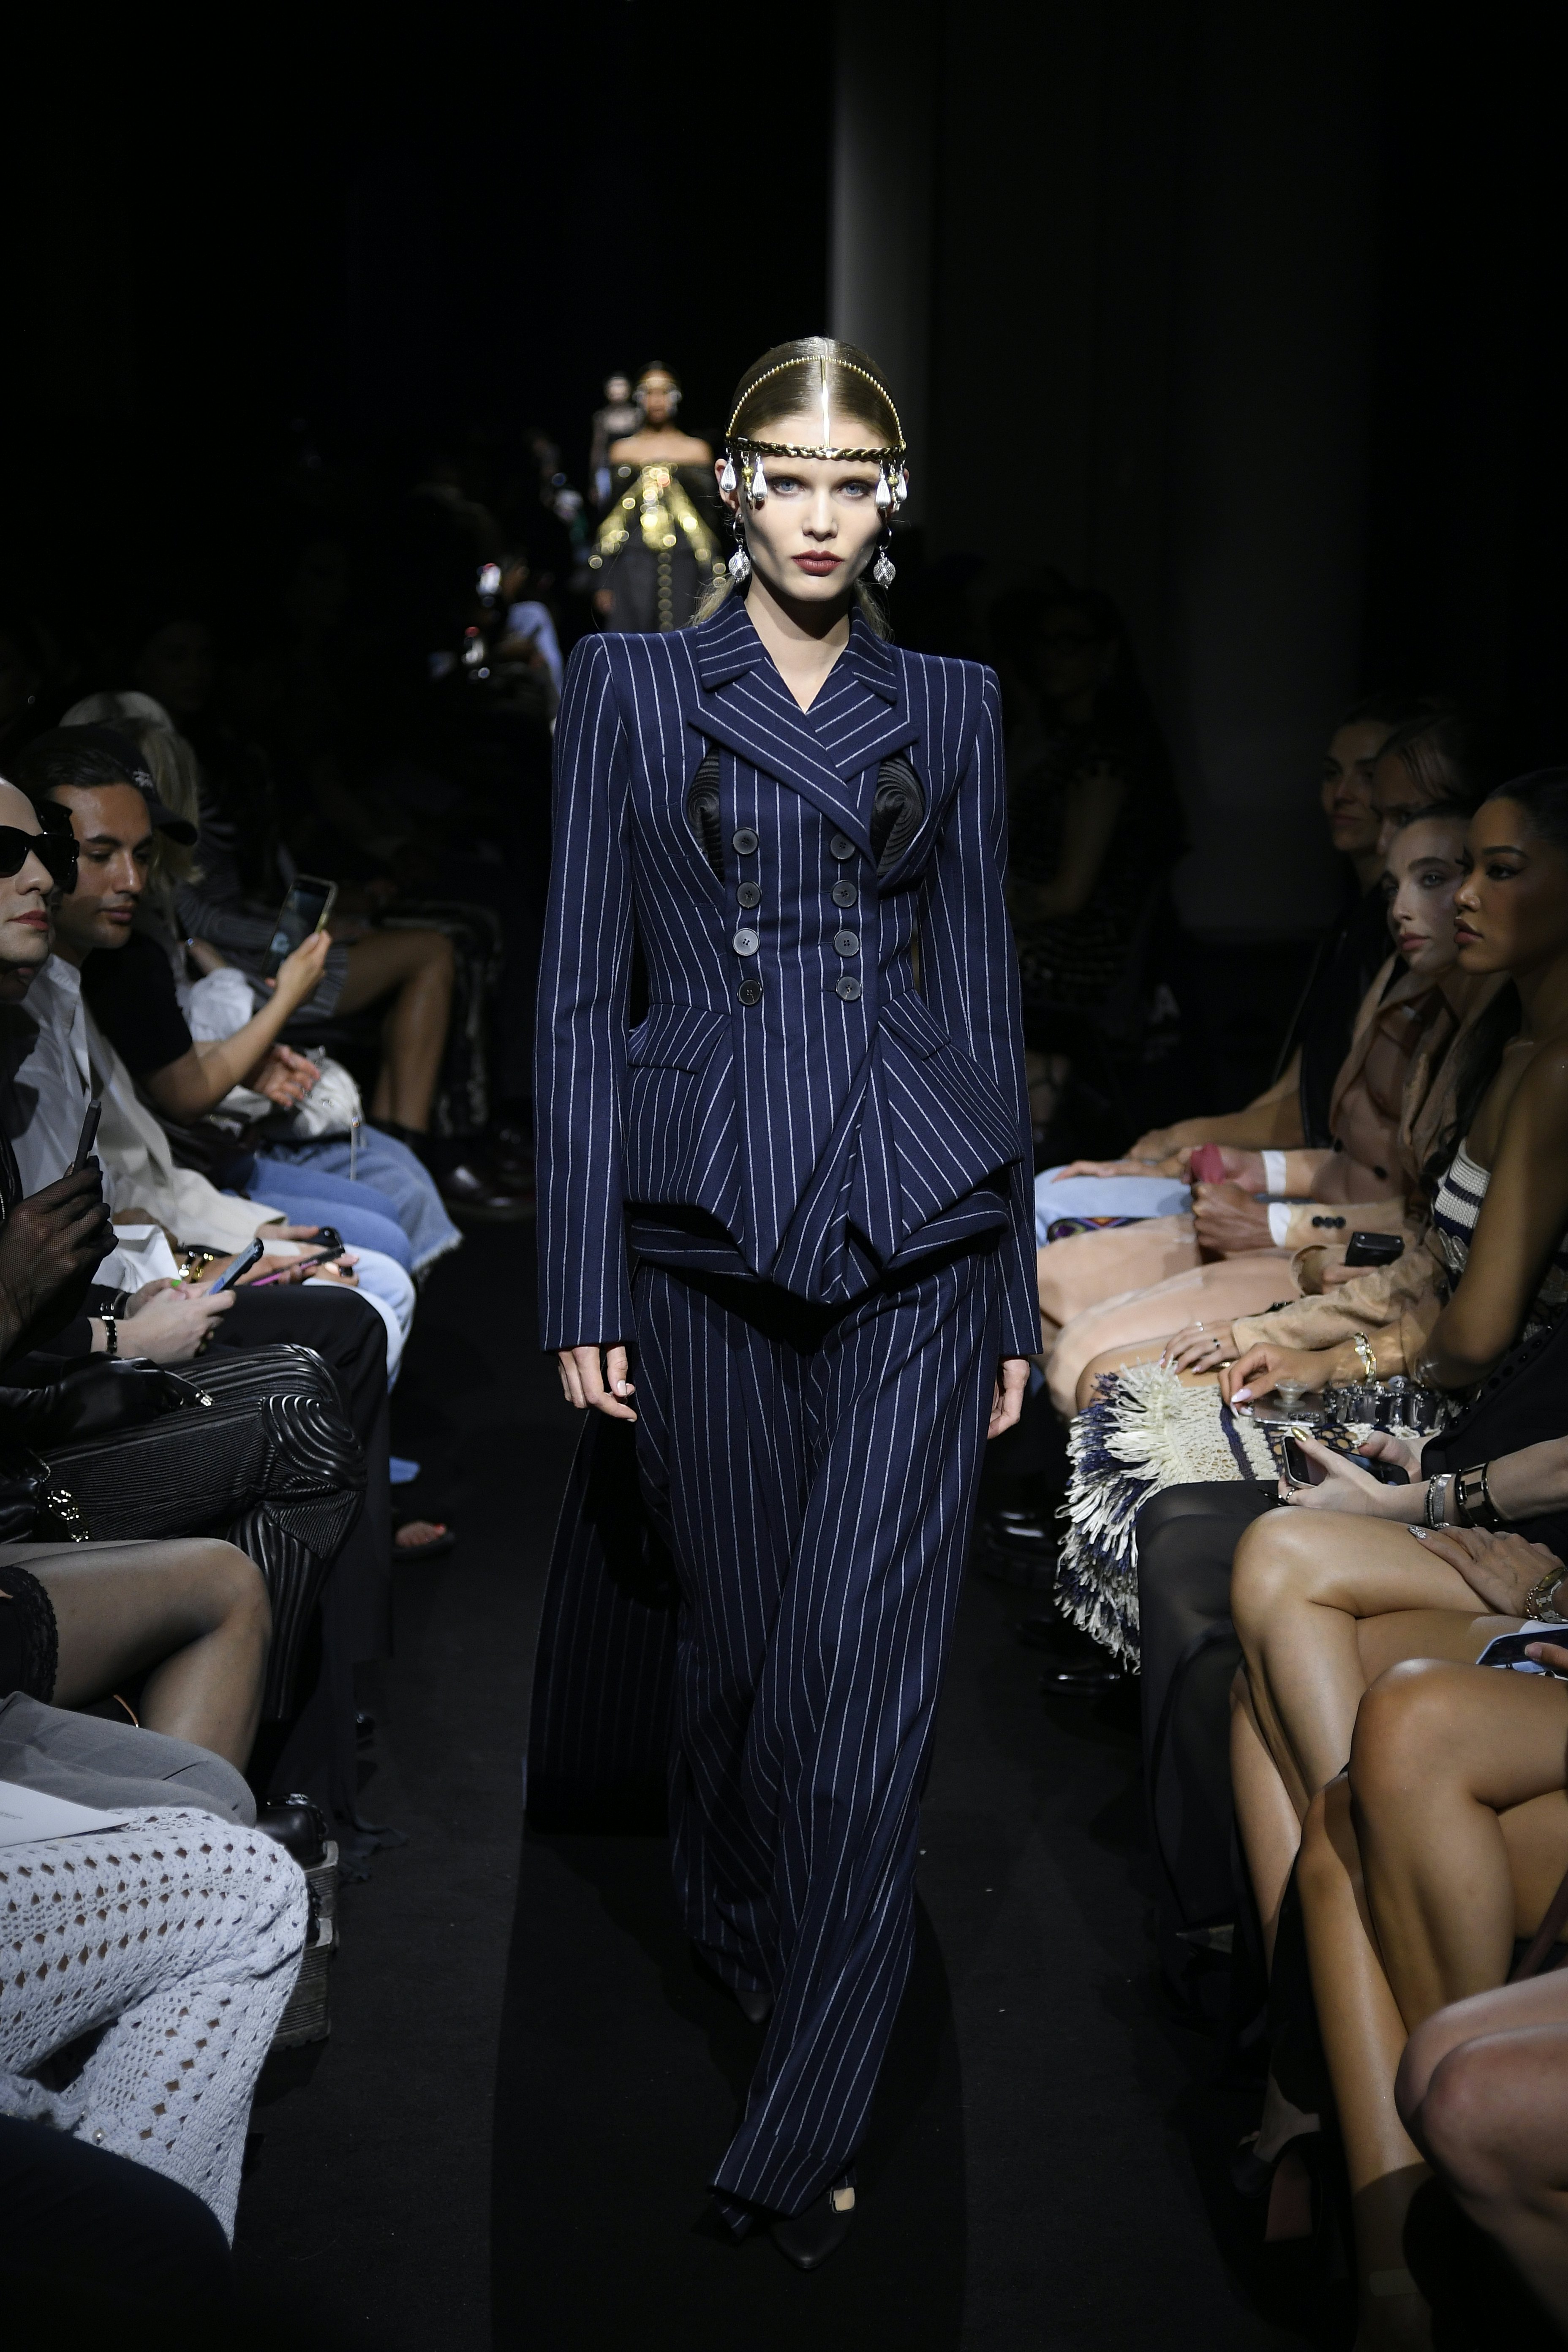 Jean Paul Gaultier Couture by Julien Dossena: Archival Fashion, Anew